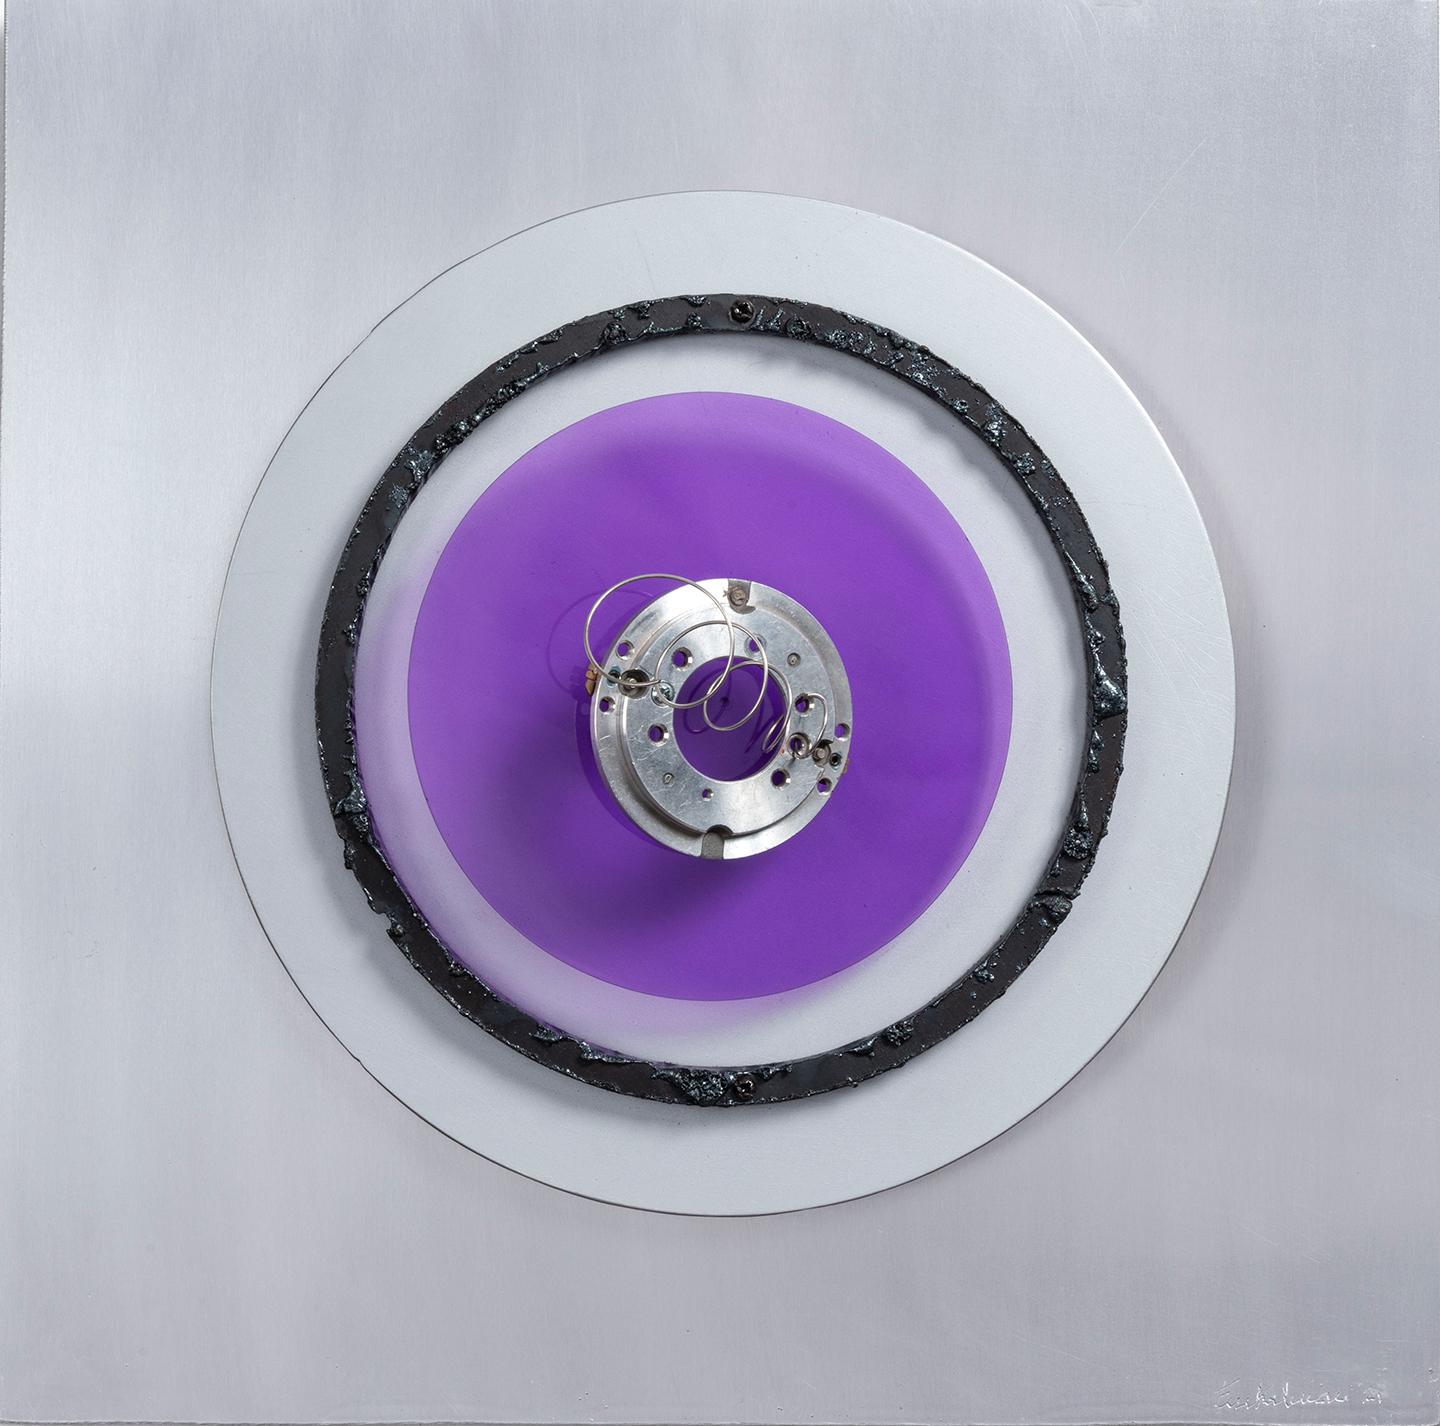 Assembler Violeta N° 3, and 1 (Diptych), by Fanny Finkelman Szyller
Overall size: 40 H x 80 W x 14 D cm.

Individual size: 
Assembler Violeta N°1:
Acrylics, aluminum, screws, and painted metal ring on aluminum
Dimensions:  40 H x 40 W x 8D